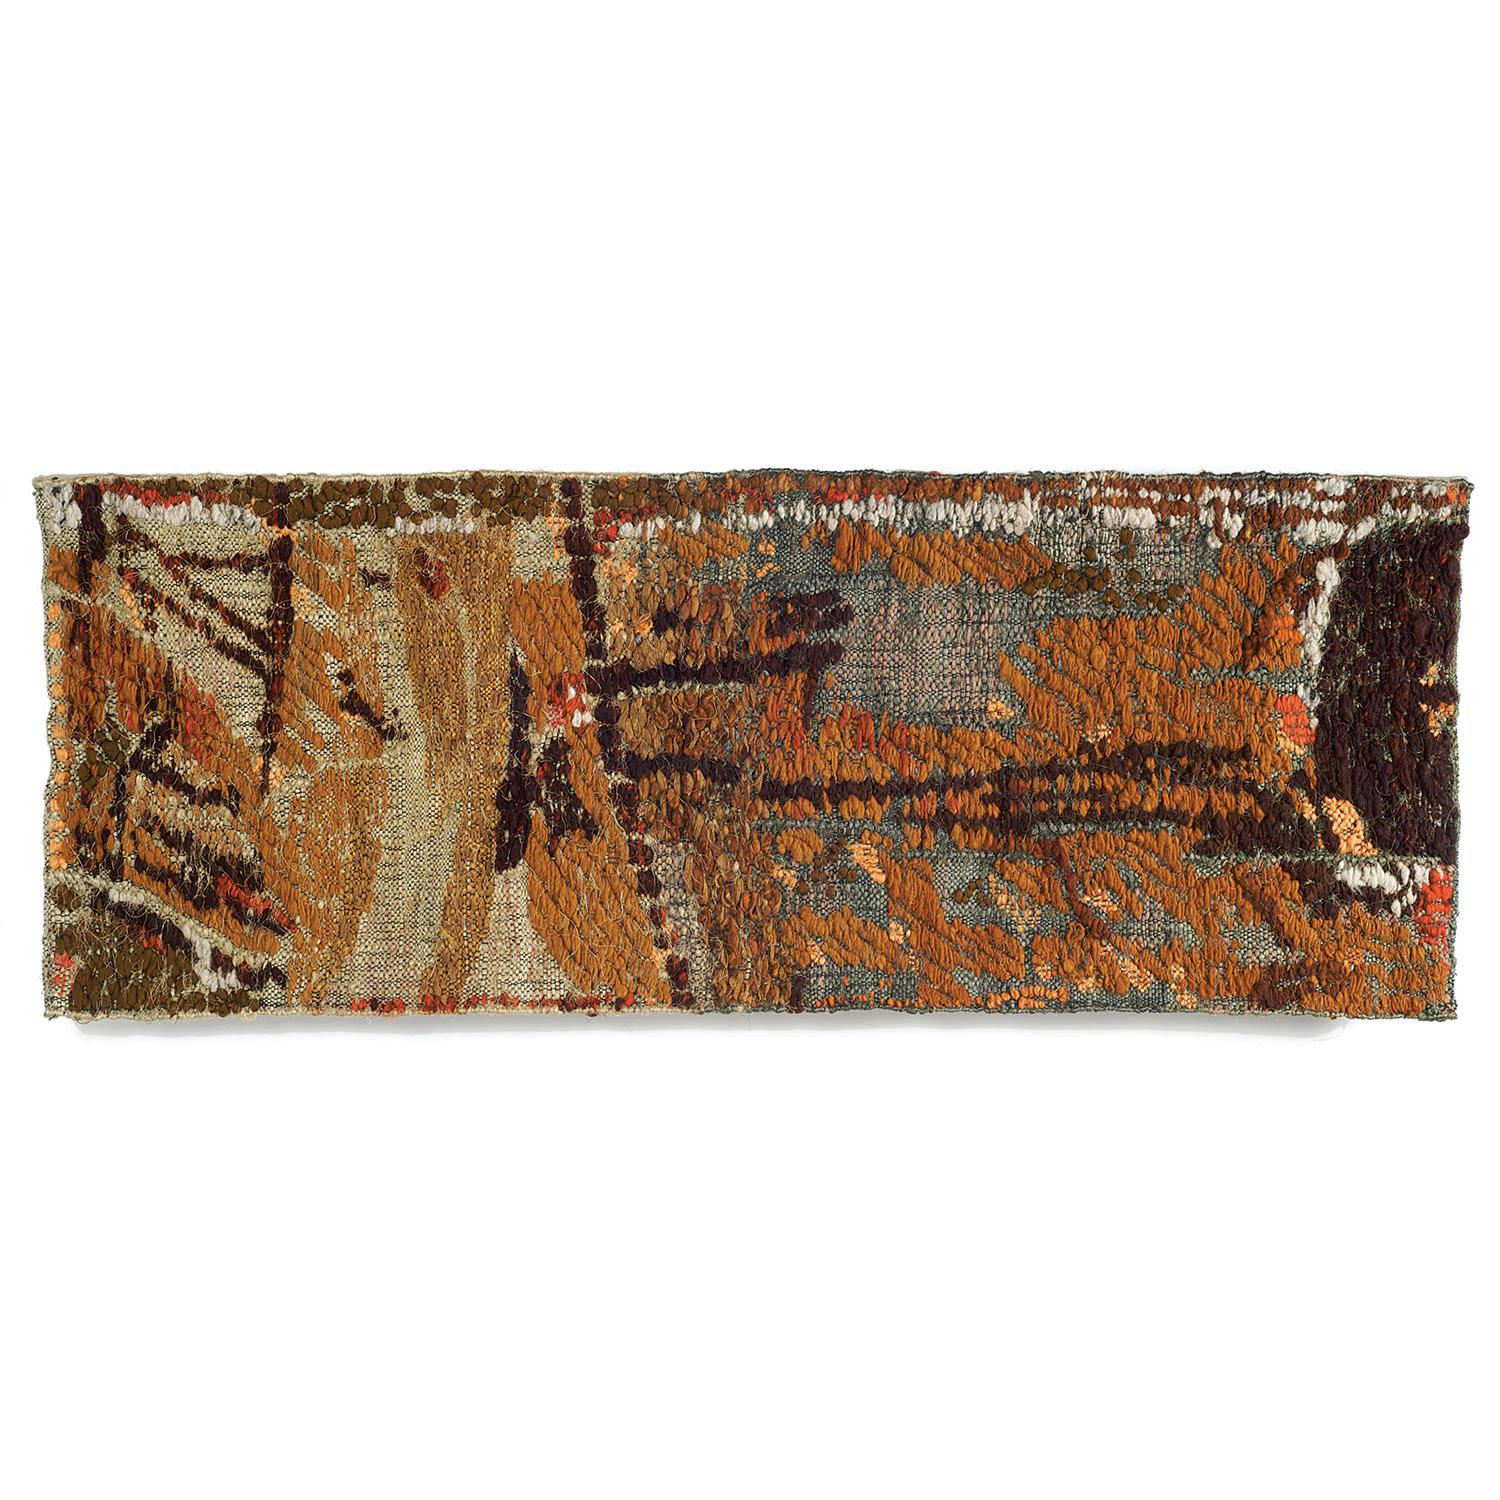 Jolanta Owidzka Abstract Sculpture - Stony Signs, Mid-Century Modern Abstract Woven Tapestry, Textile Wall Sculpture